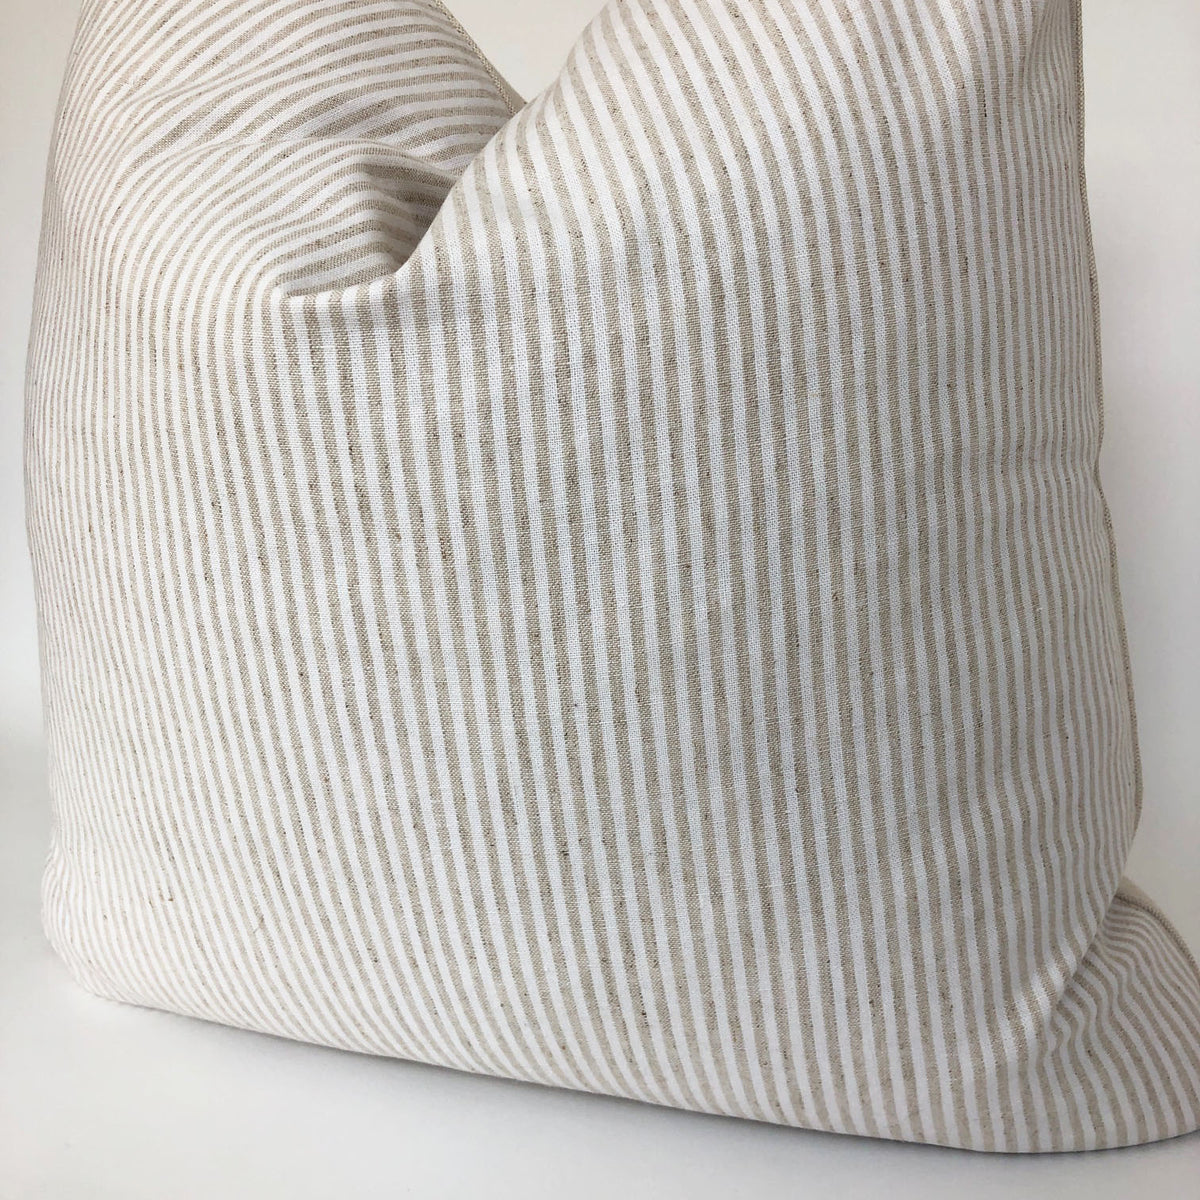 White and Beige Ticking Stripe Pillow Cover